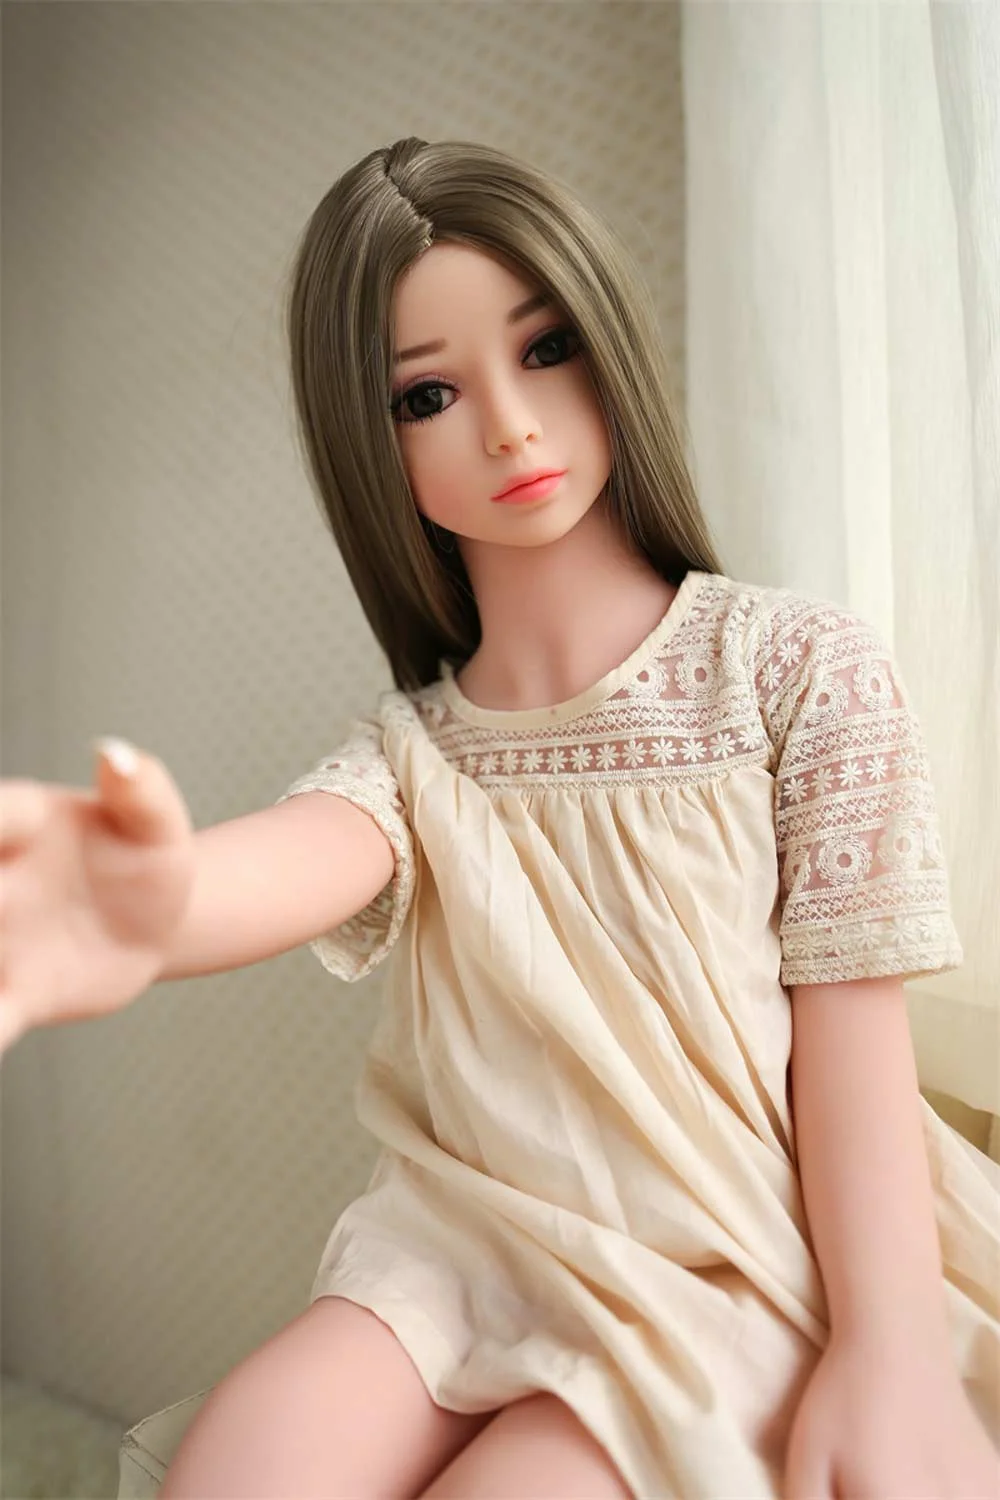 Mini sex doll with one hand out